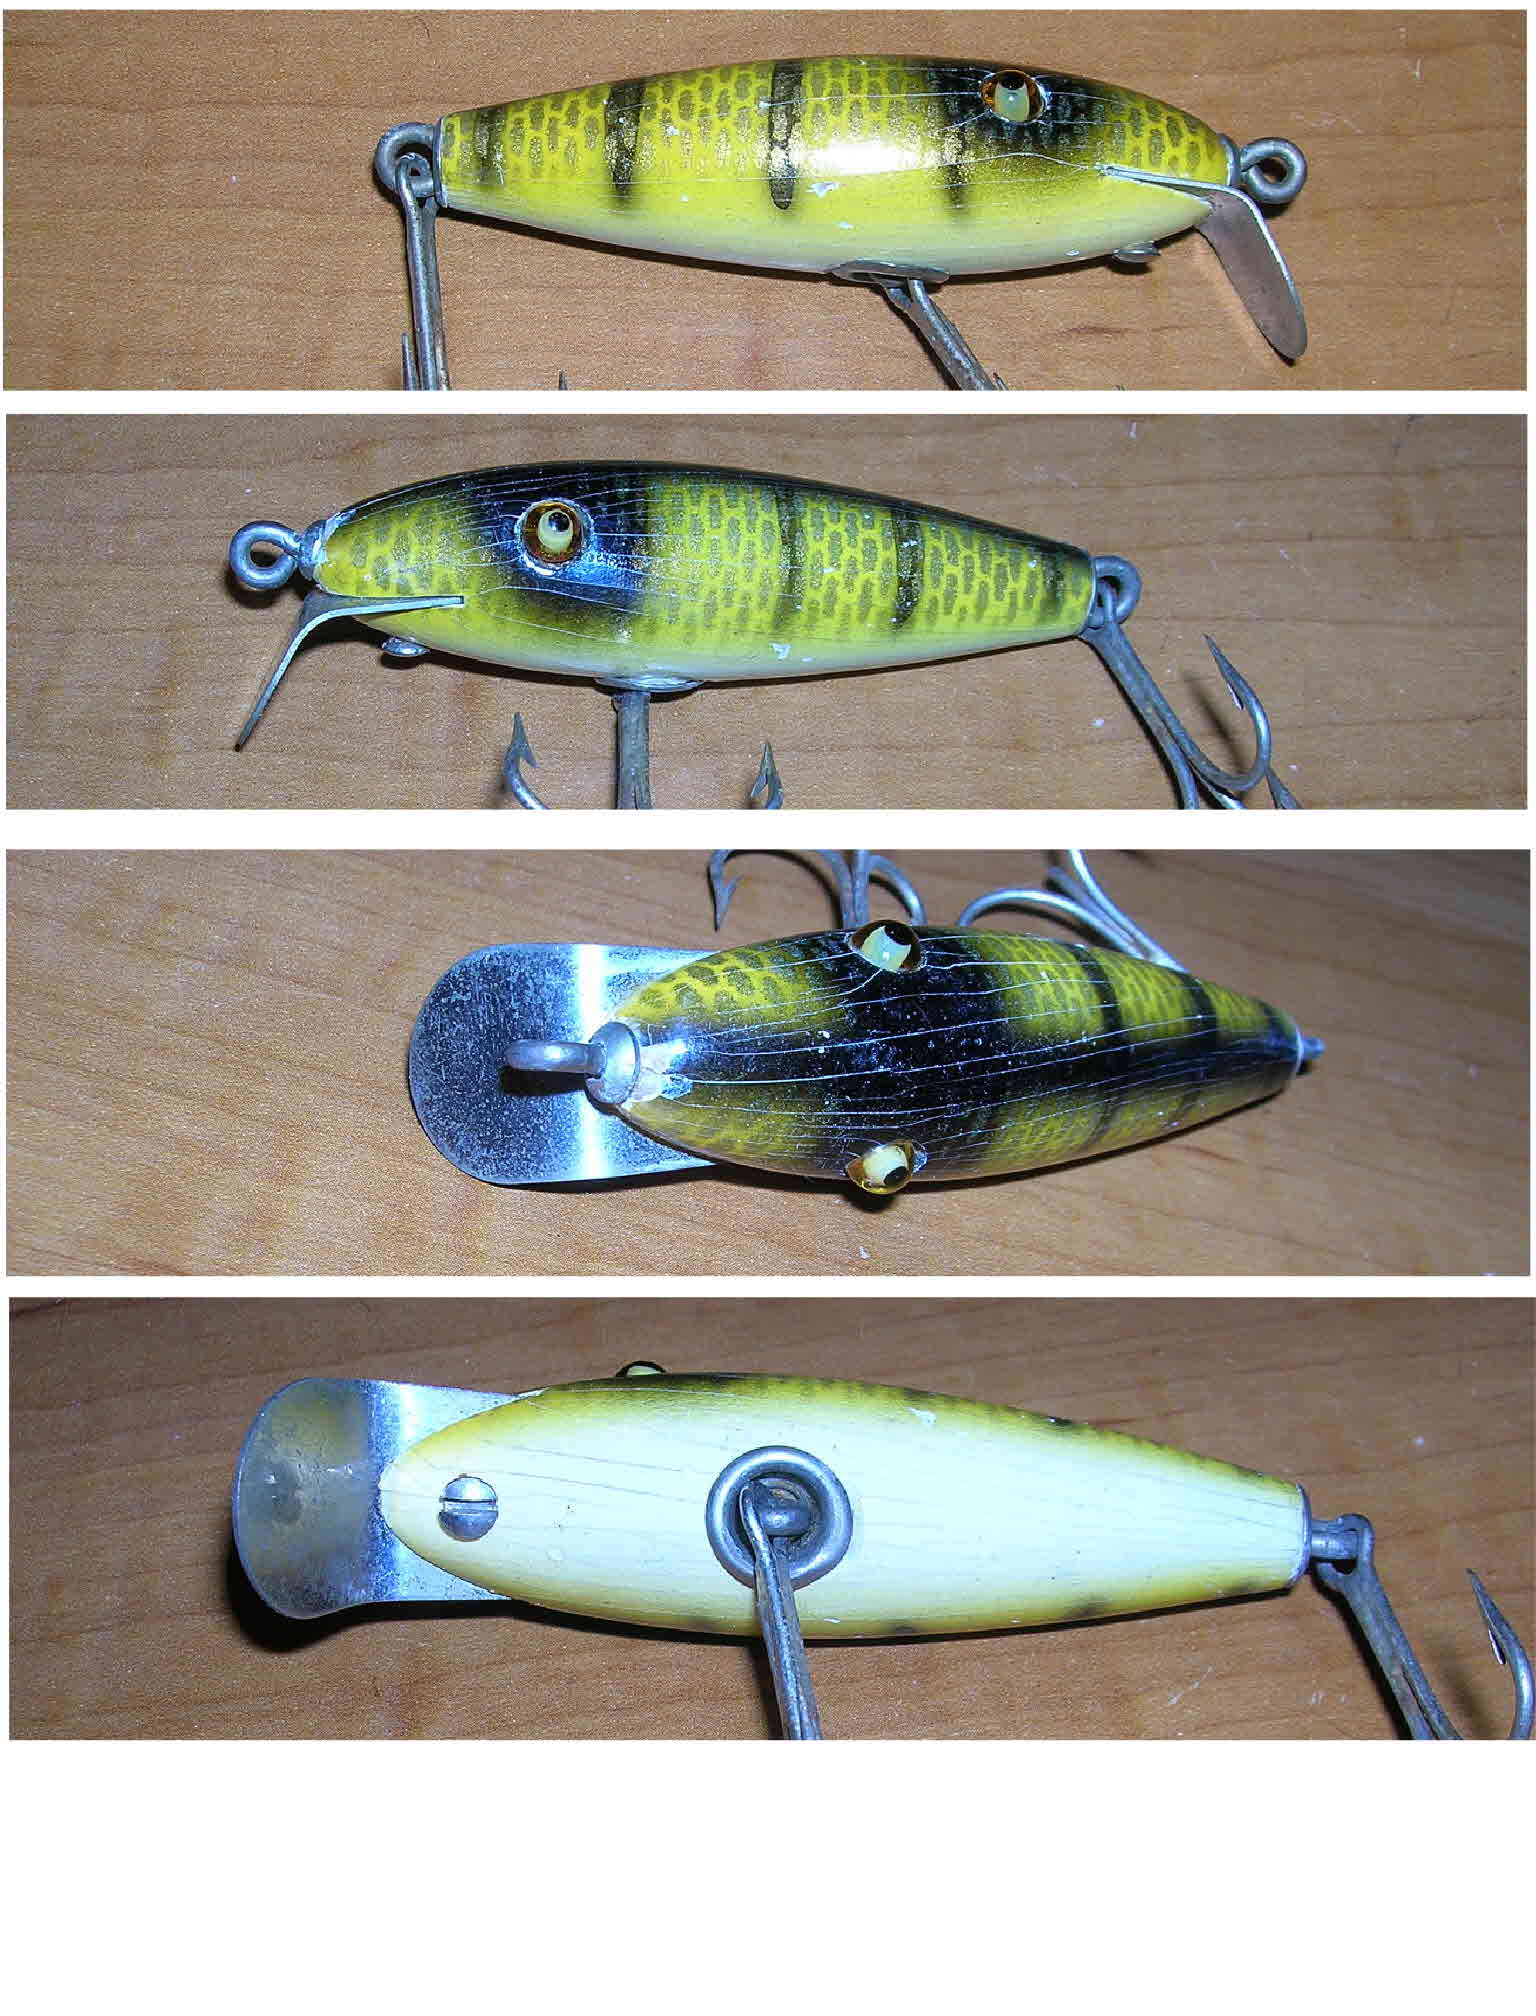 https://www.fishingcollectables.com/images/cc813.jpg